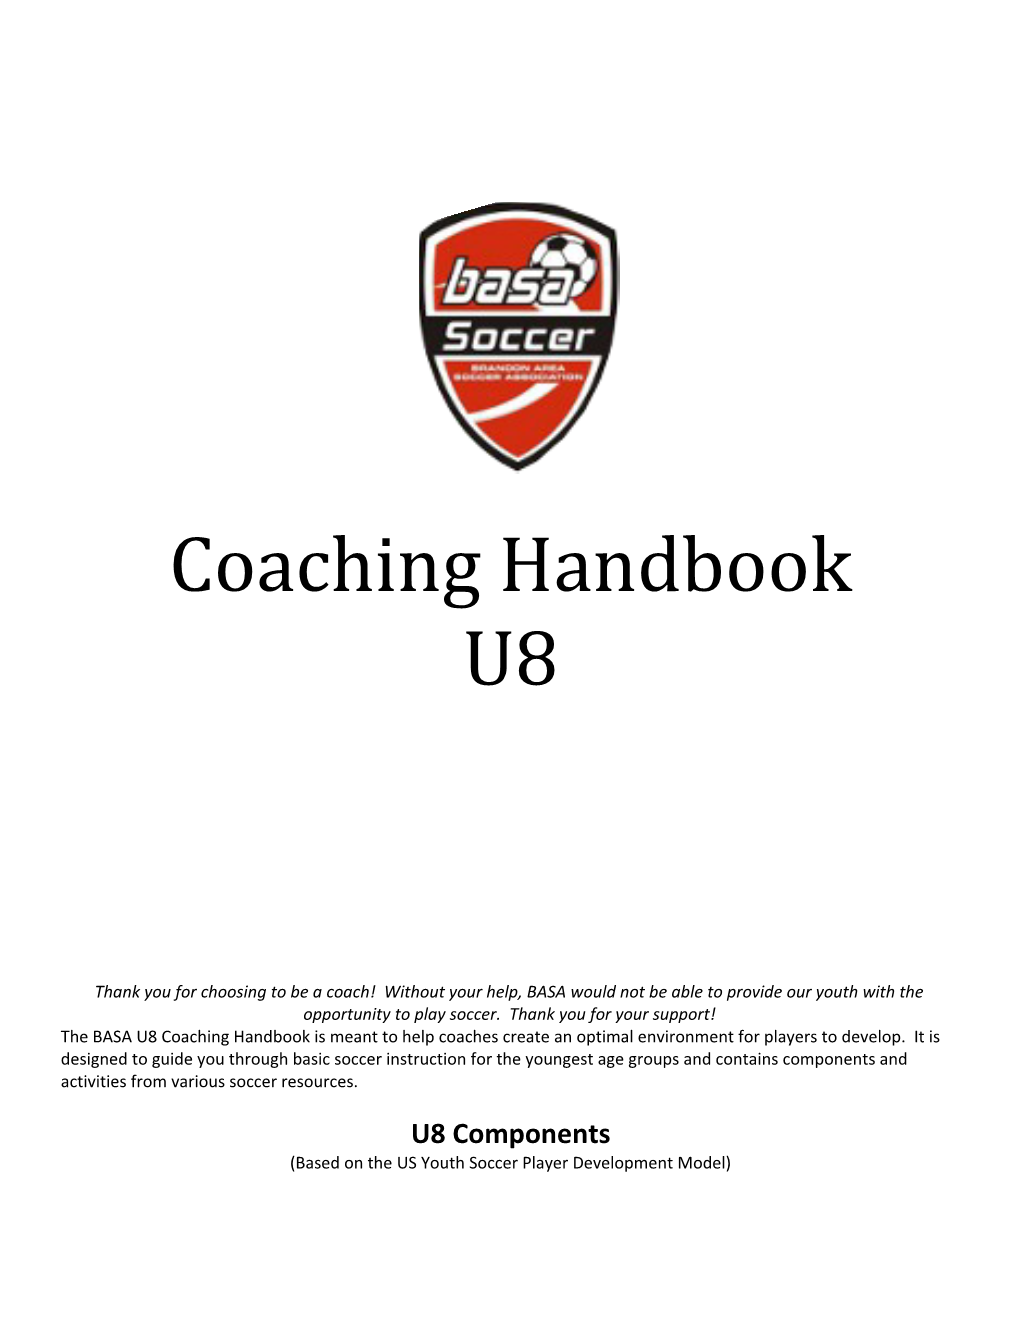 Based on the US Youth Soccer Player Development Model